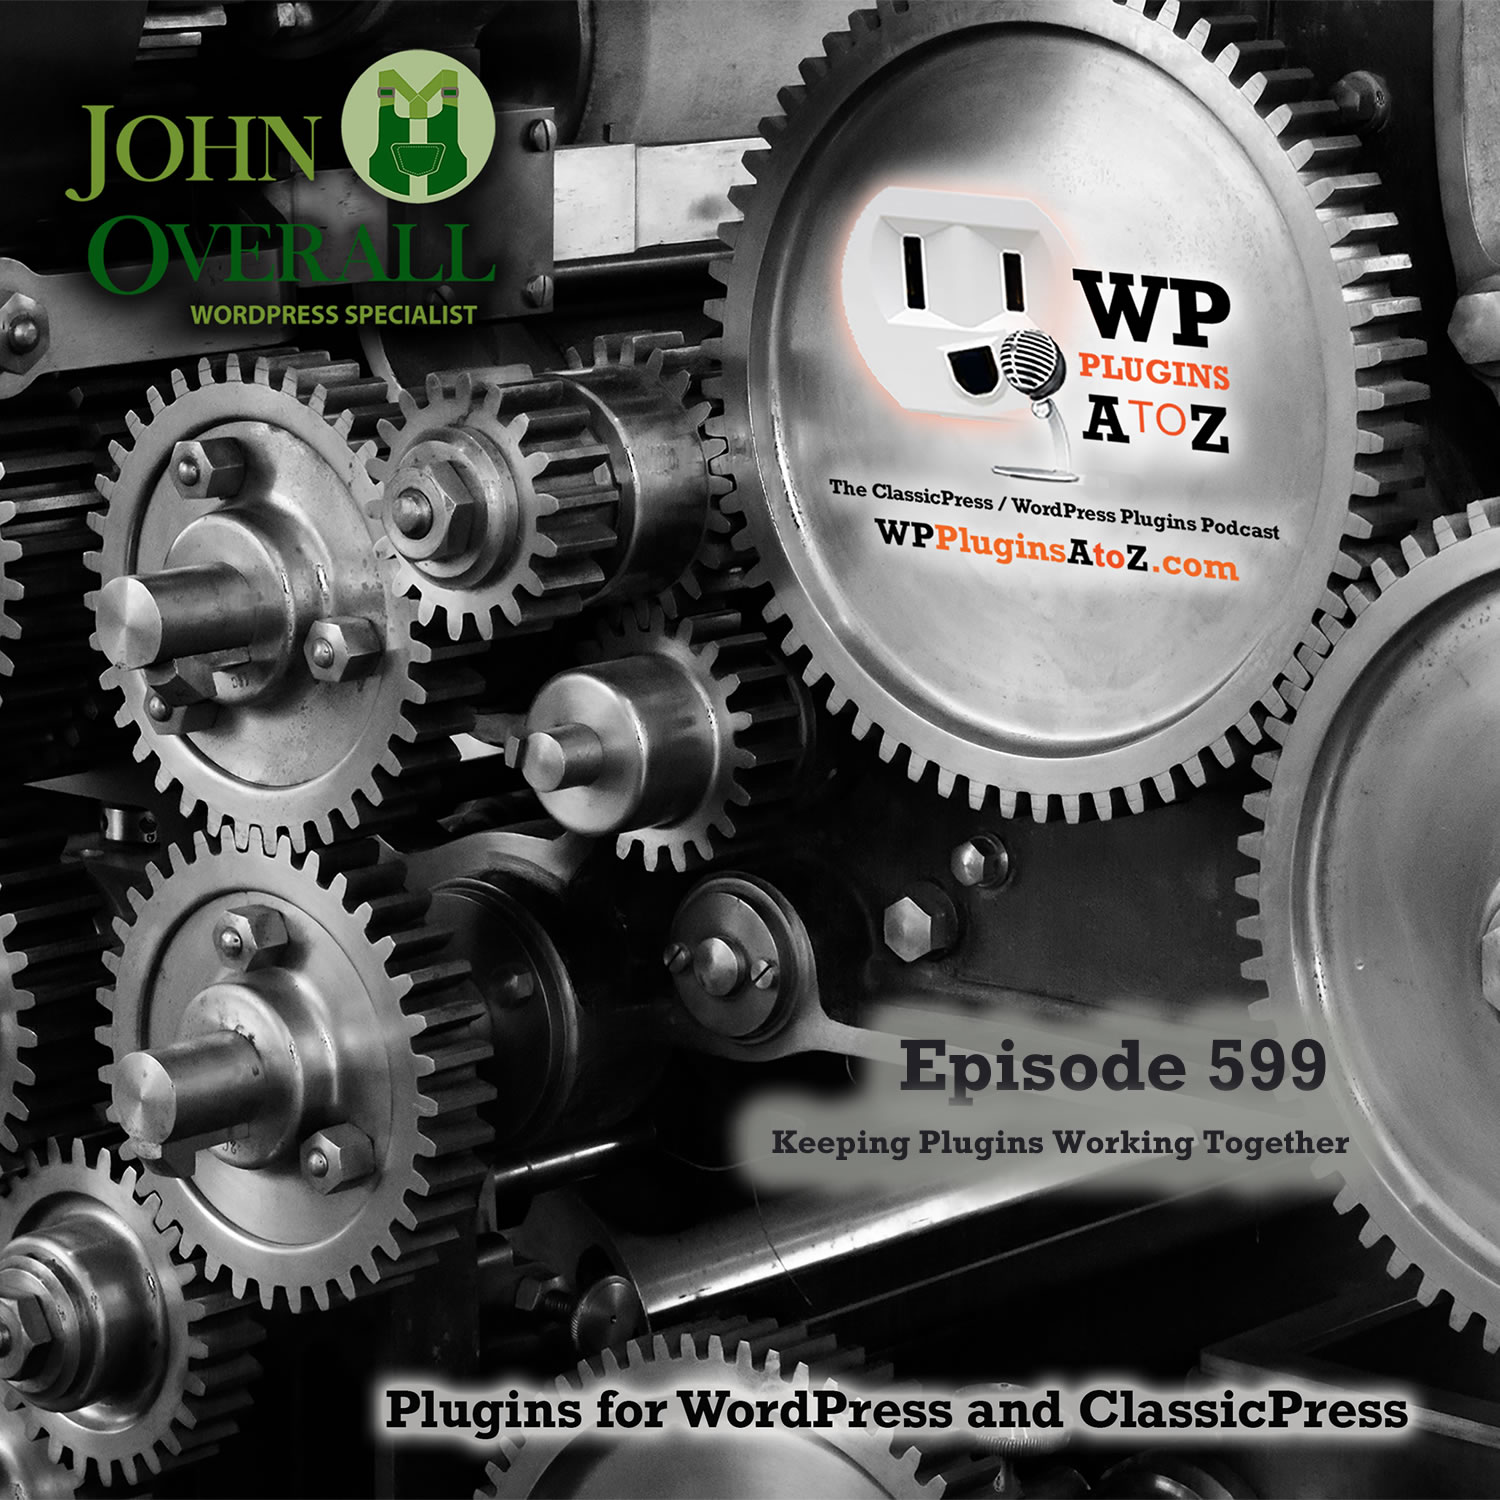 It's Episode 599 and we have plugins for  Customizing Logins, Creating with ChatGPT... and WordPress News. It's all coming up on WordPress Plugins A-Z!